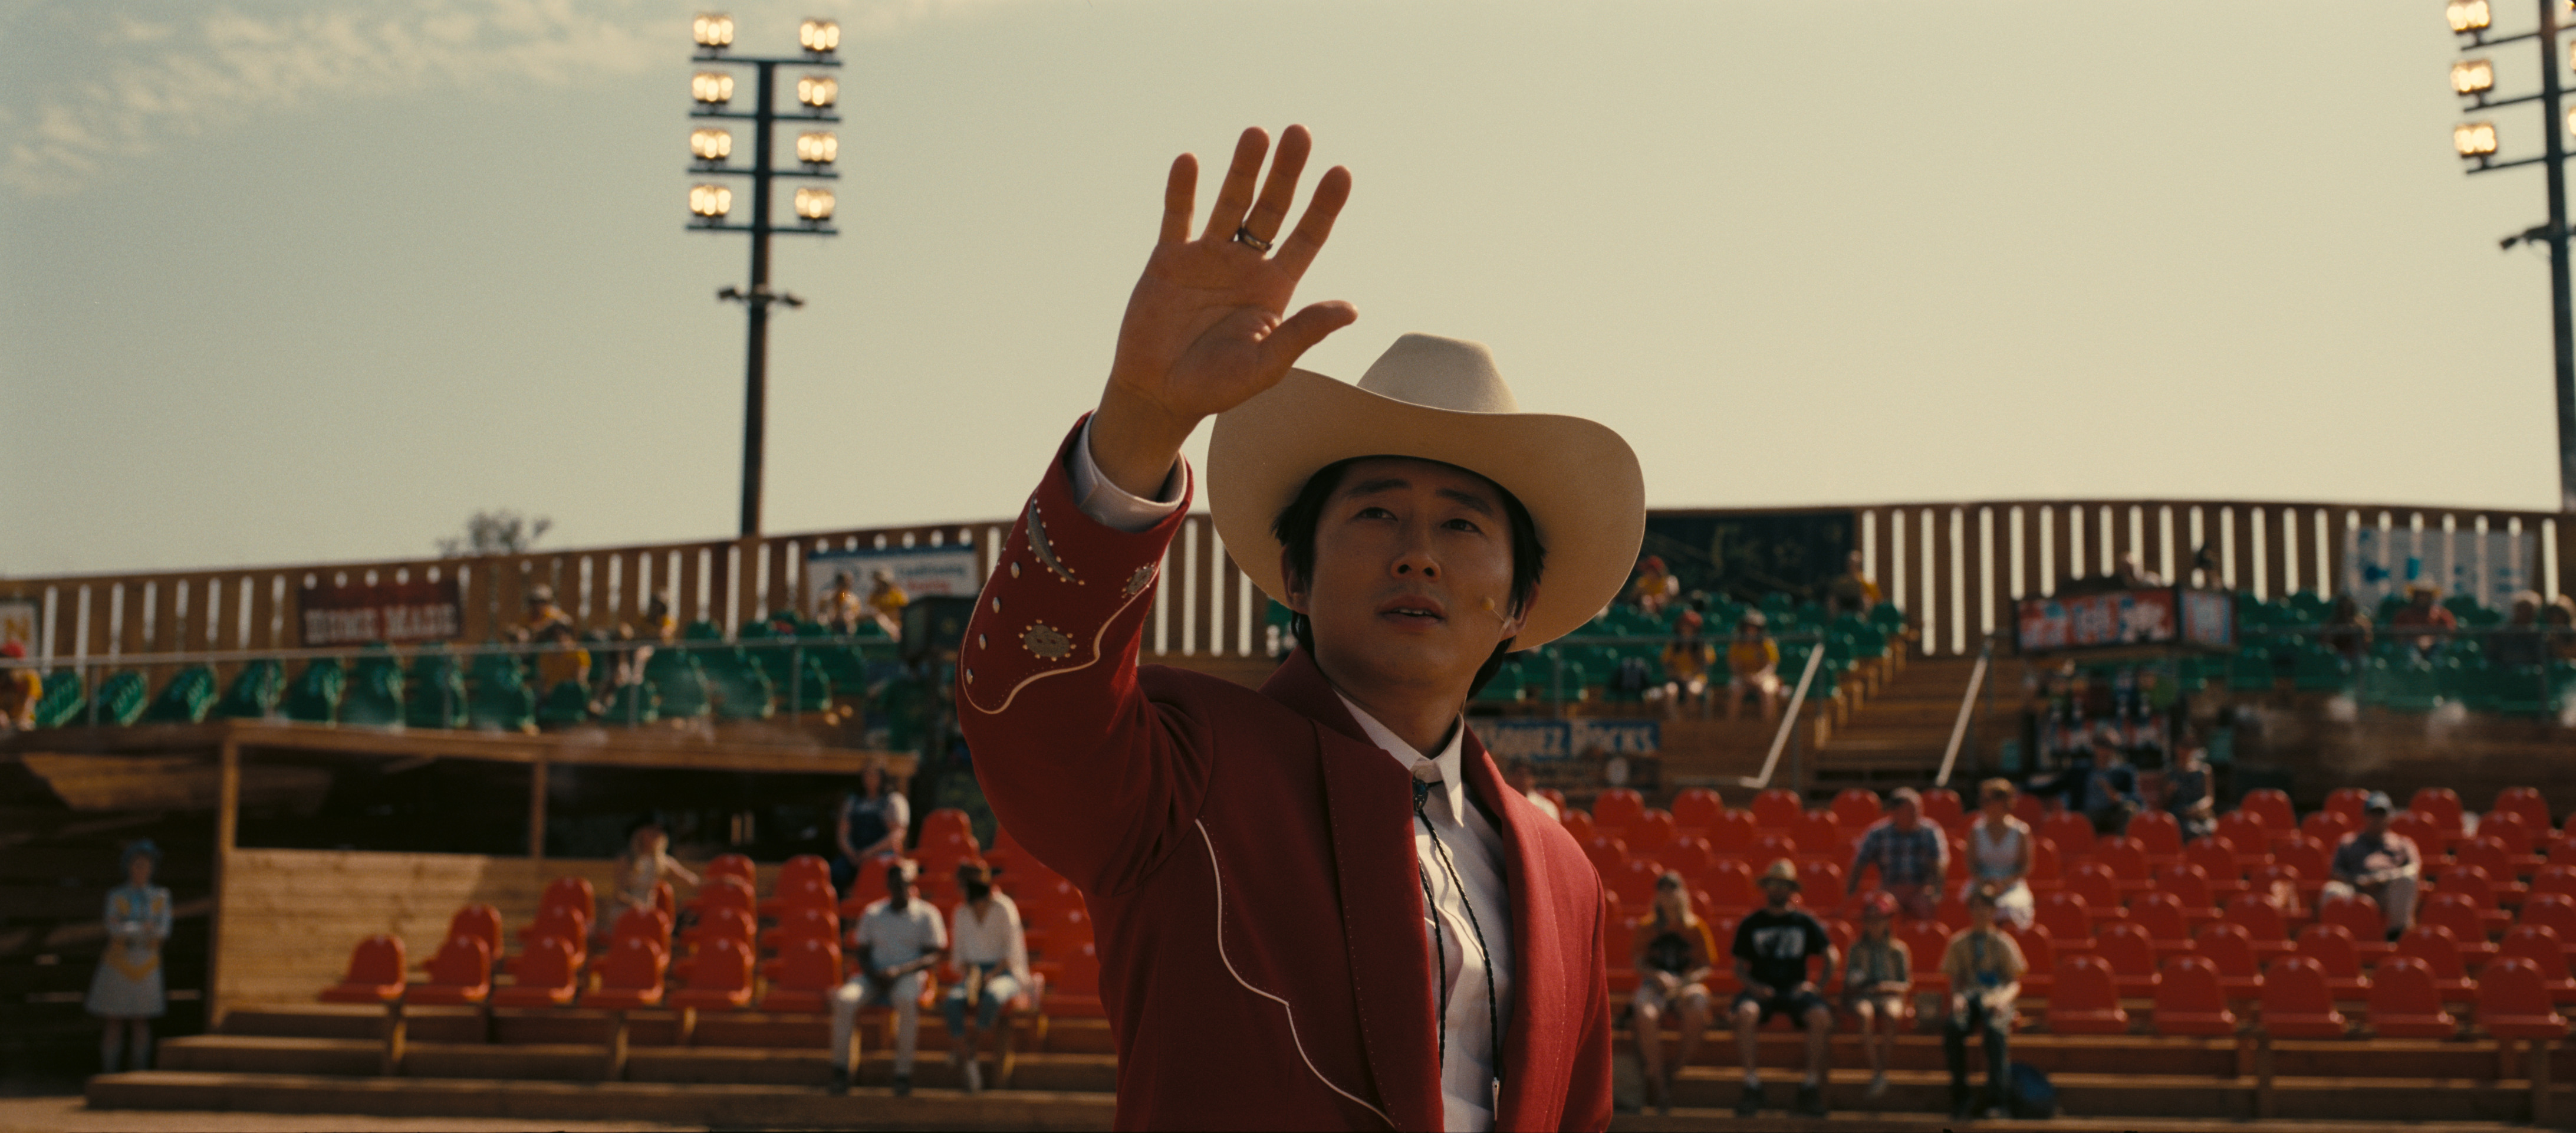 Ricky “Jupe” Park standing in front of an only barely filled stadium crowd, holding his hand up and looking at the sky